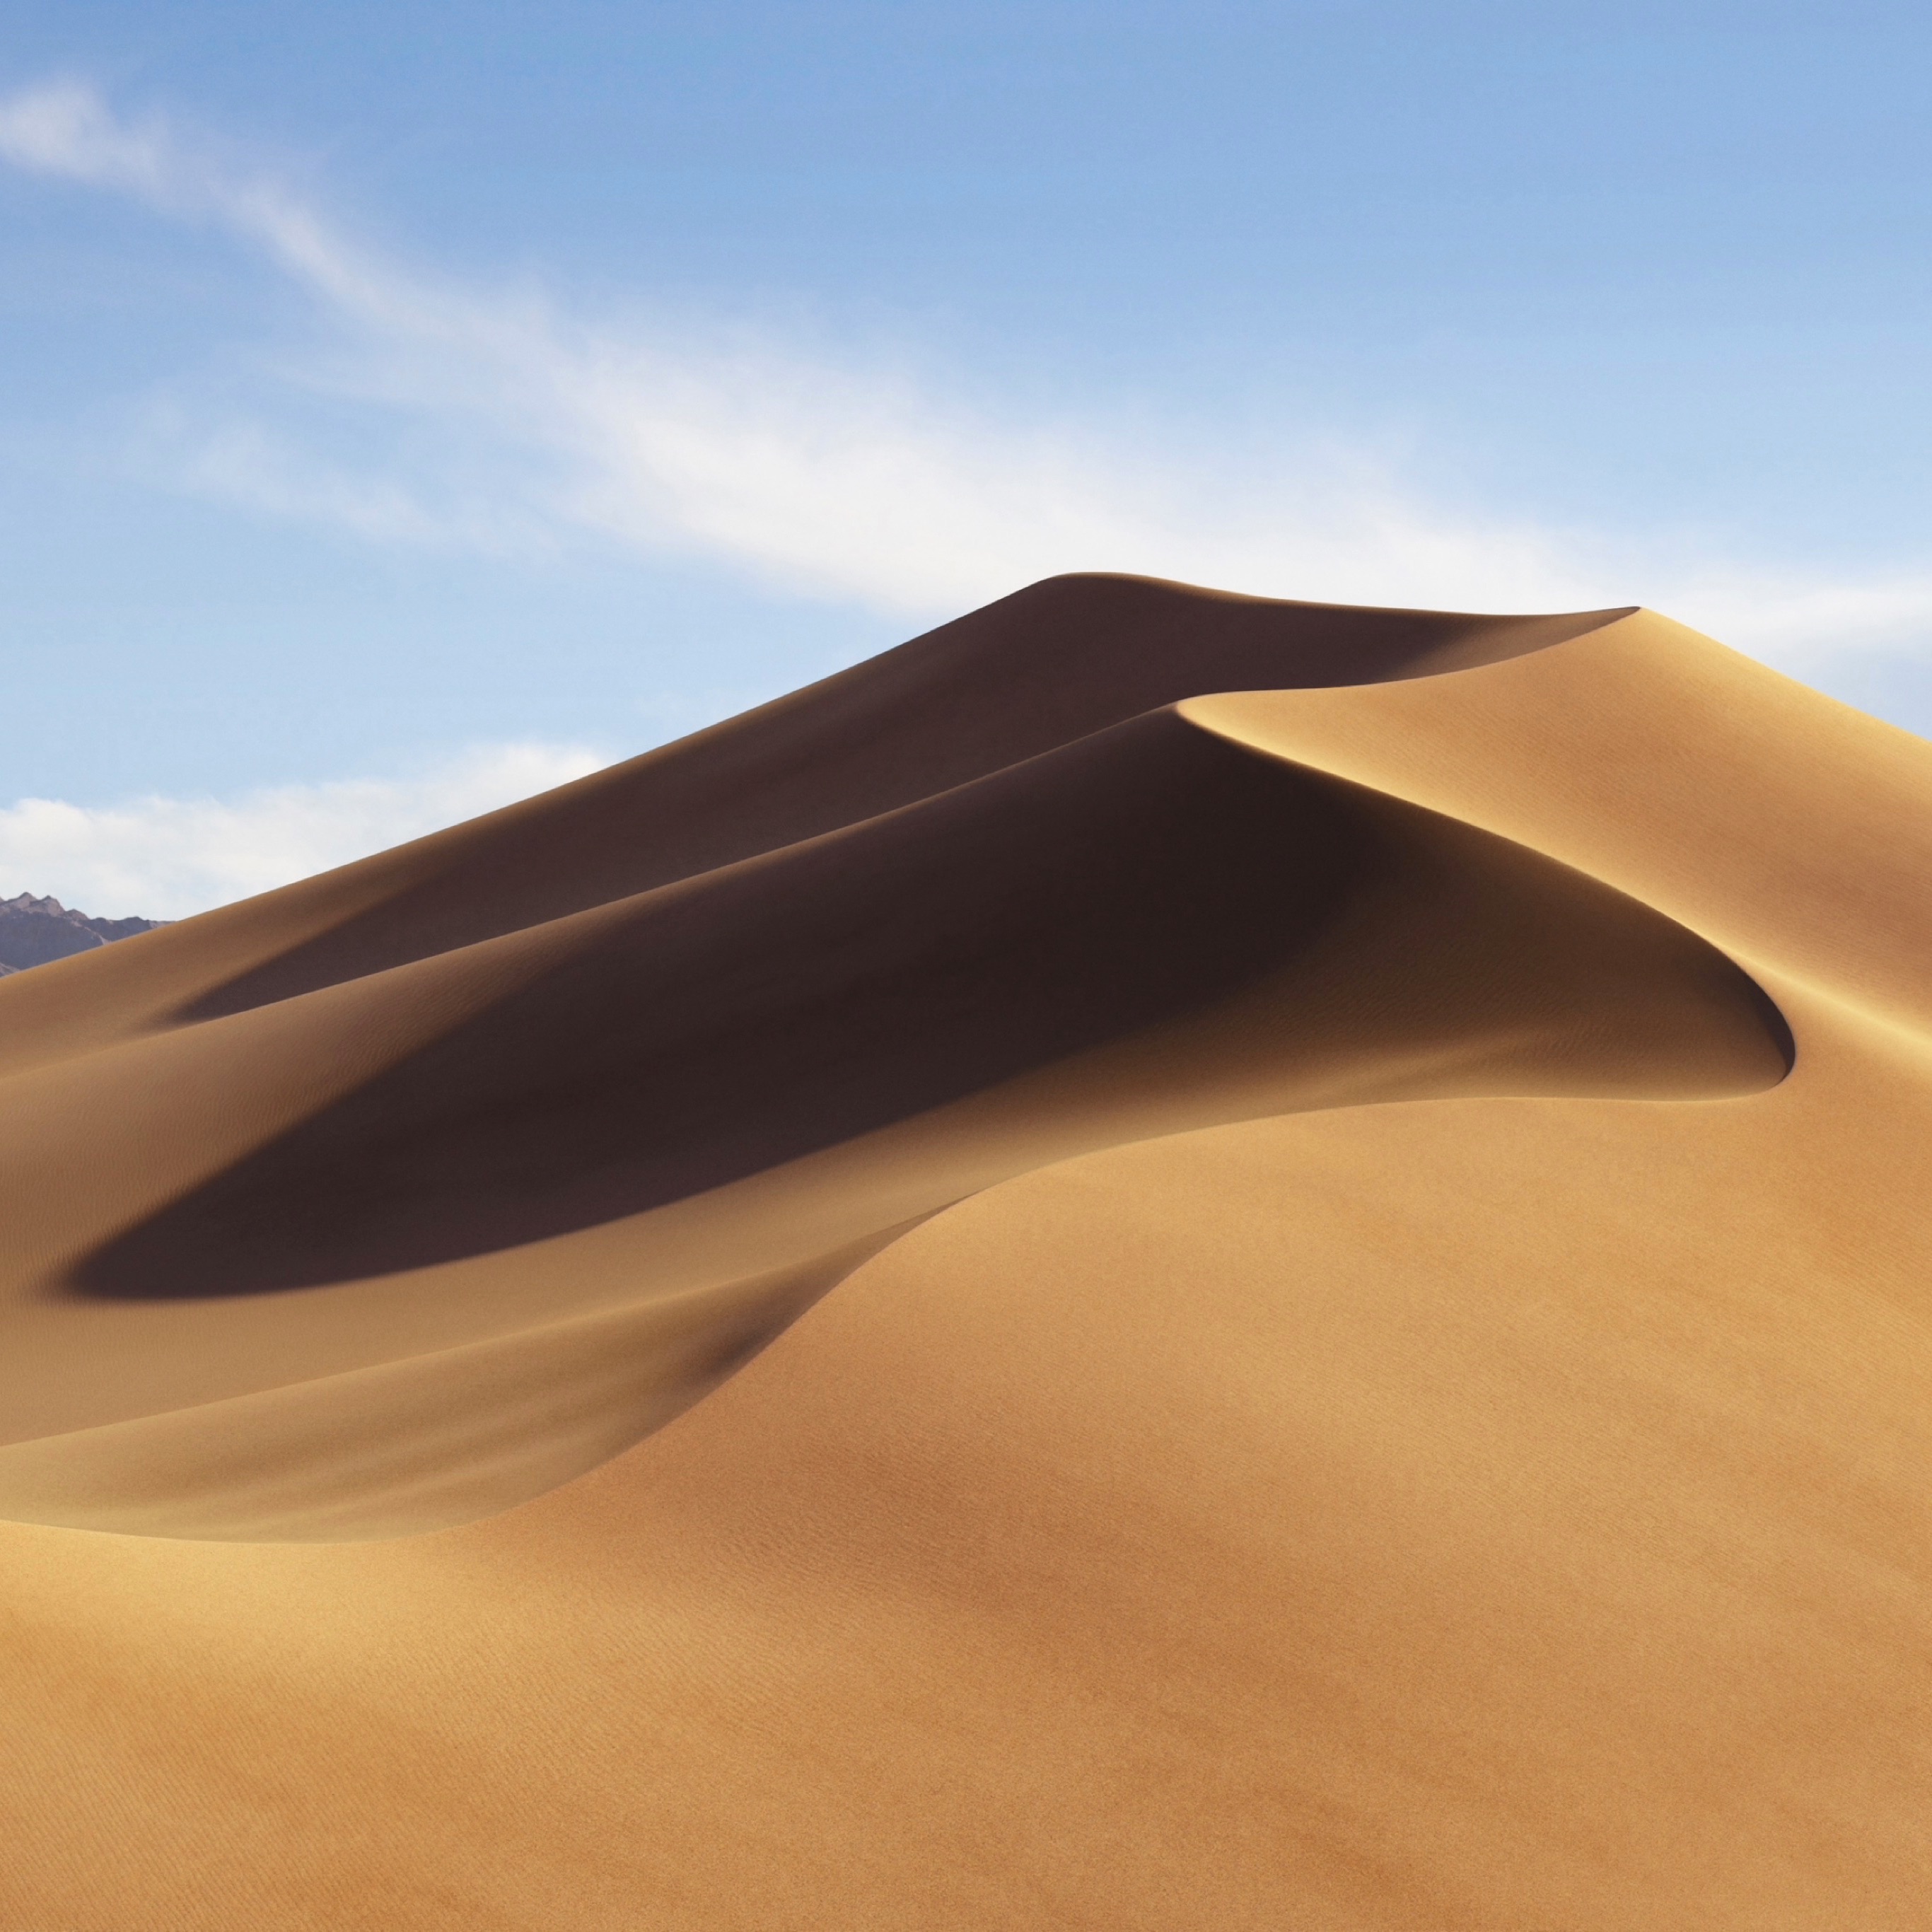 Wallpaper Weekends Macos Mojave Wallpapers For Iphone Ipad And